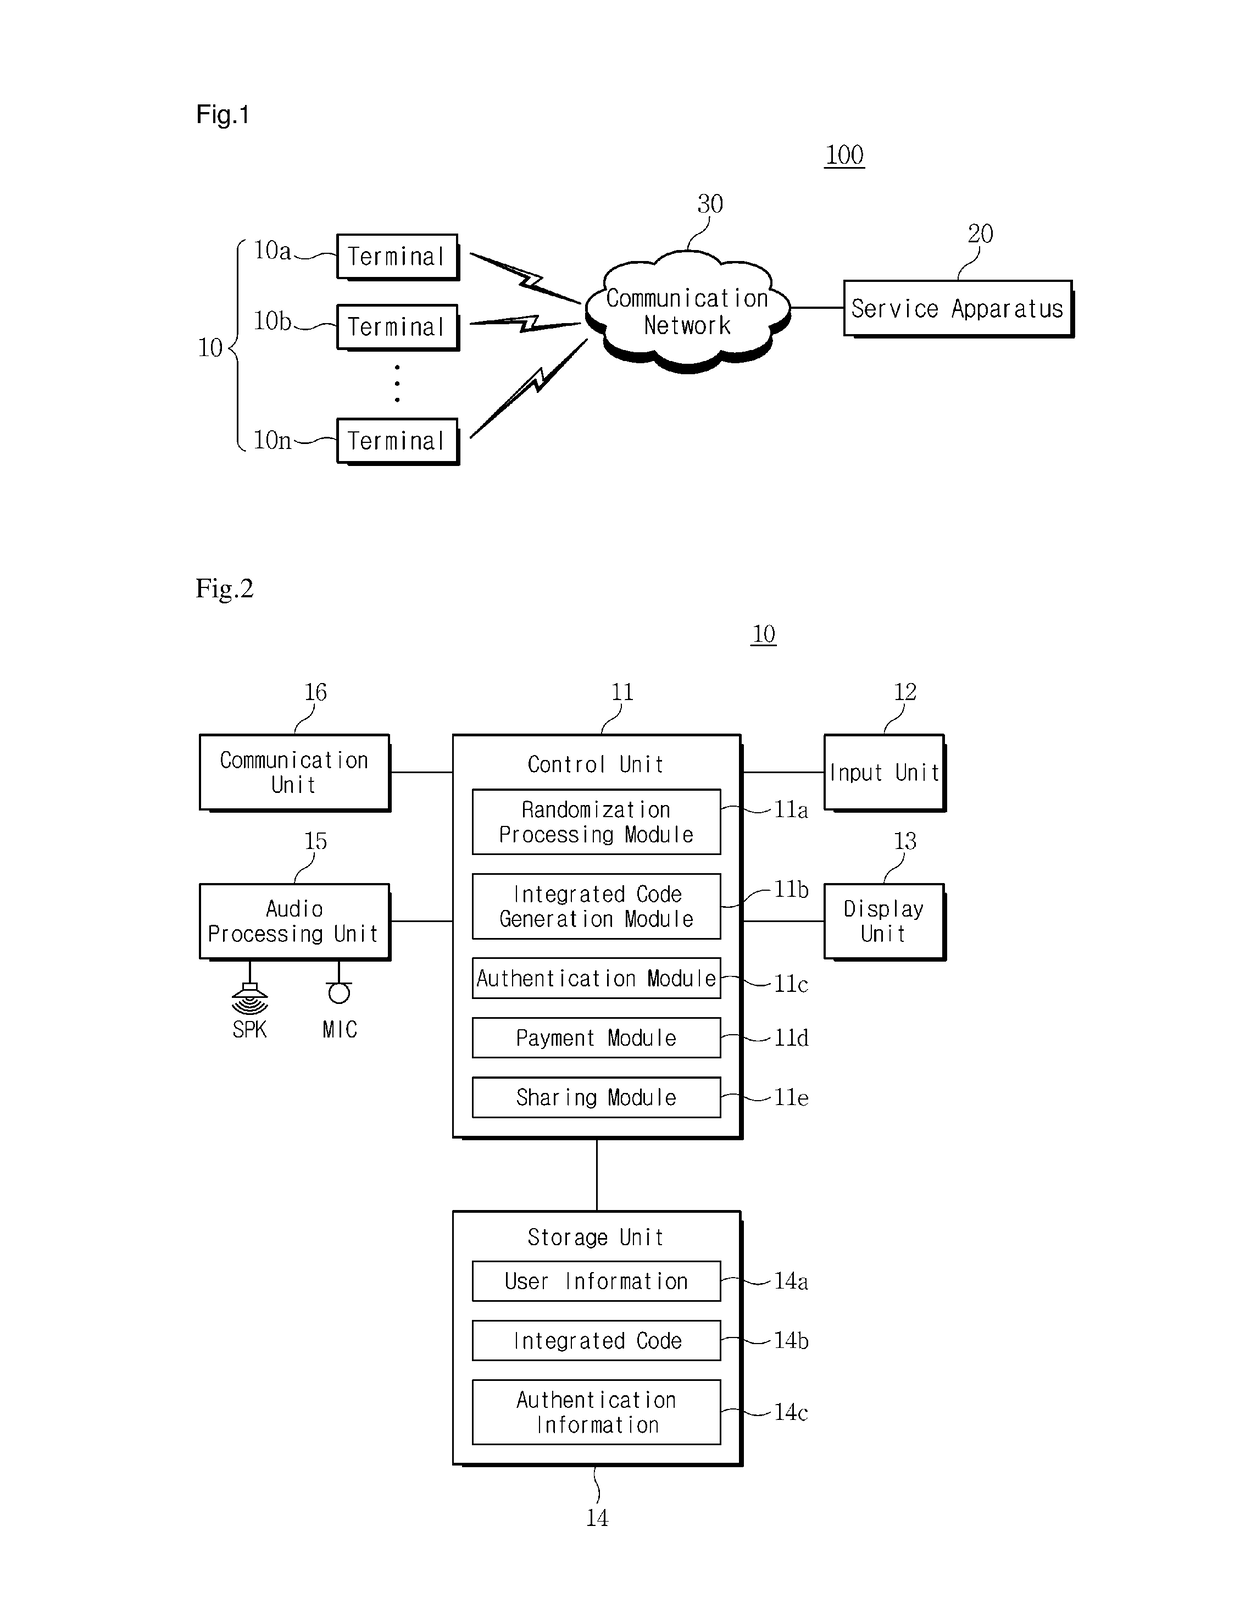 Method for supporting payment service using integrated code, and system and apparatus therefor